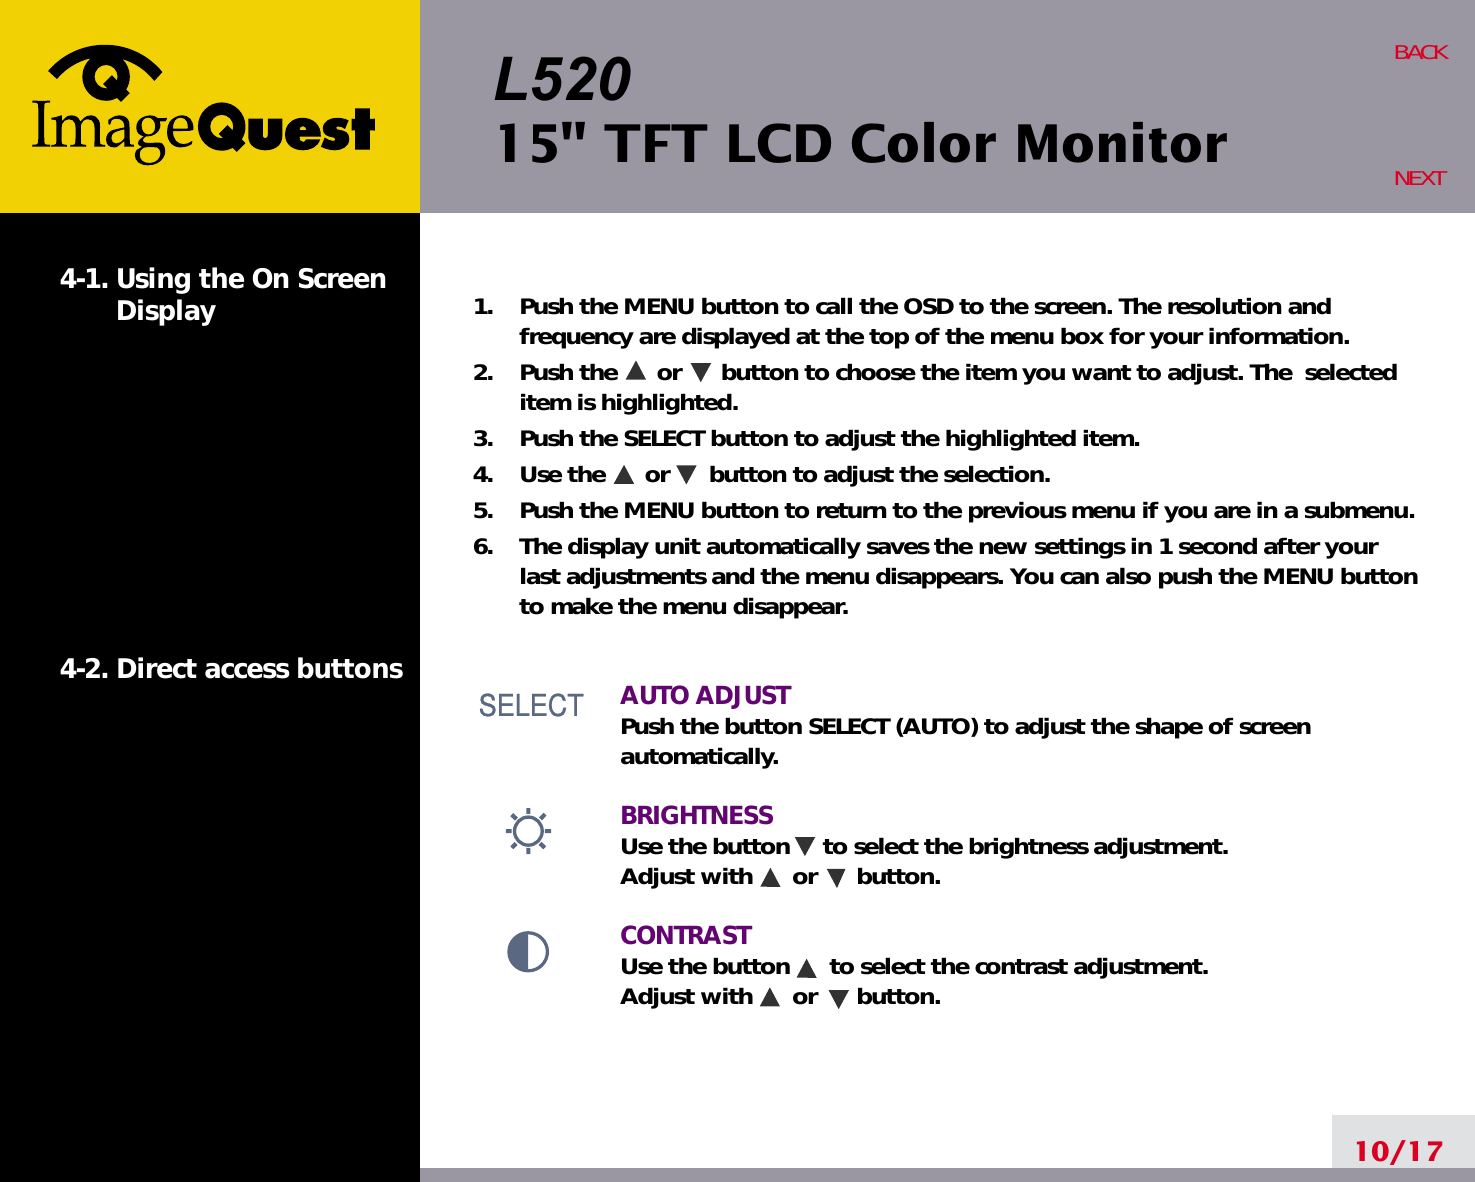 L52015&quot; TFT LCD Color Monitor10/17BACKNEXT1.    Push the MENU button to call the OSD to the screen. The resolution andfrequency are displayed at the top of the menu box for your information.2.    Push the      or      button to choose the item you want to adjust. The  selecteditem is highlighted.3.    Push the SELECT button to adjust the highlighted item. 4.    Use the      or      button to adjust the selection.5.    Push the MENU button to return to the previous menu if you are in a submenu.6.    The display unit automatically saves the new settings in 1 second after yourlast adjustments and the menu disappears. You can also push the MENU buttonto make the menu disappear.AUTO ADJUSTPush the button SELECT (AUTO) to adjust the shape of screenautomatically.BRIGHTNESS Use the button     to select the brightness adjustment. Adjust with      or      button.CONTRASTUse the button      to select the contrast adjustment. Adjust with      or      button.4-1. Using the On ScreenDisplay 4-2. Direct access buttonsSELECTSELECTSELECT